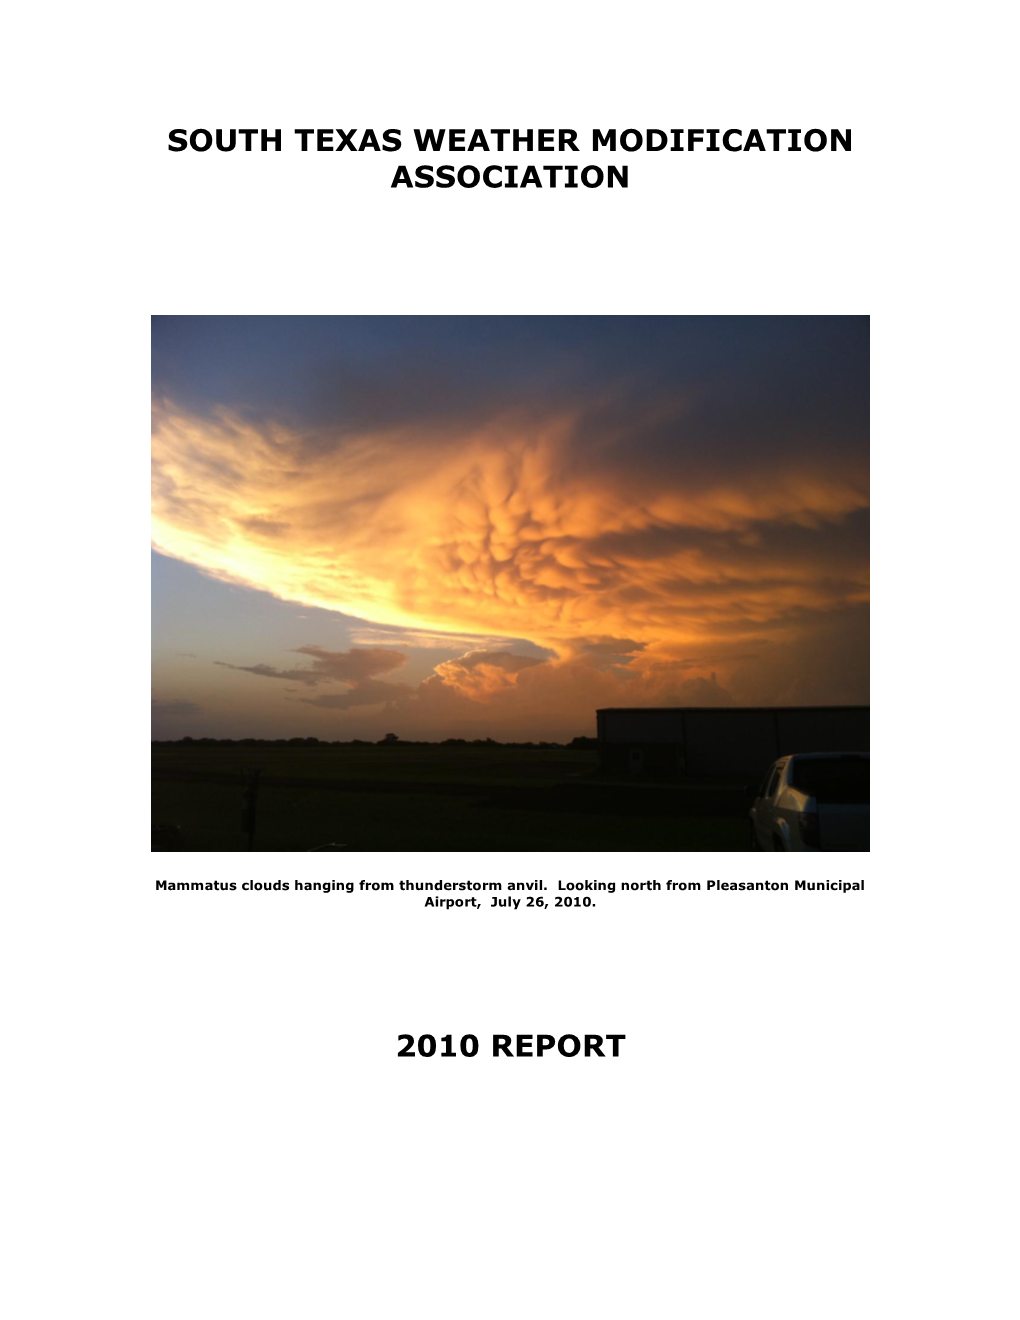 South Texas Weather Modification Association